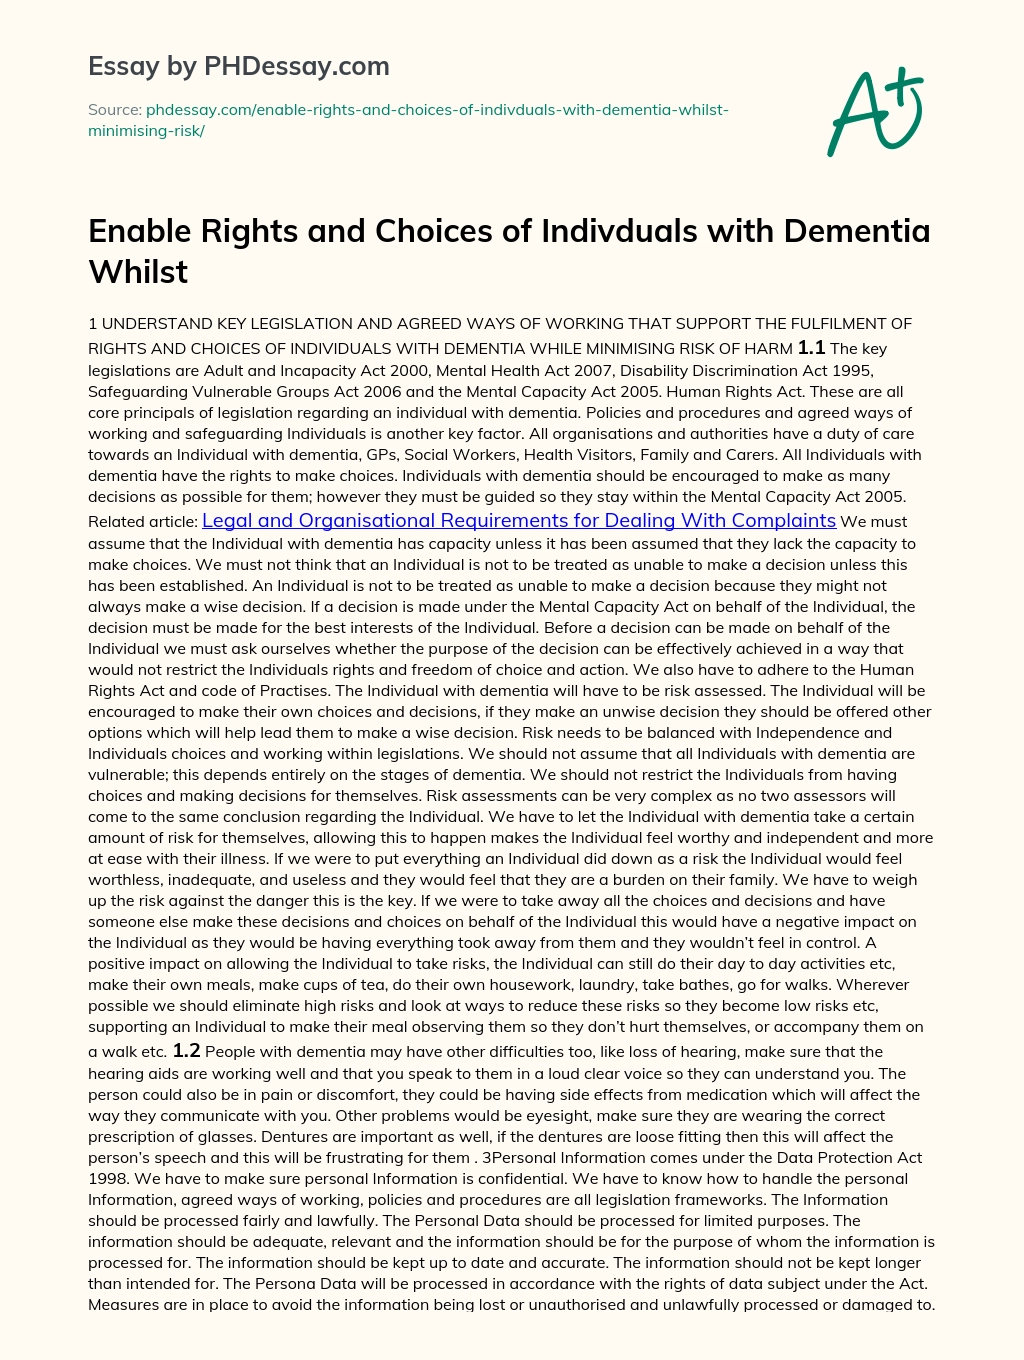 Enable Rights and Choices of Indivduals with Dementia Whilst essay